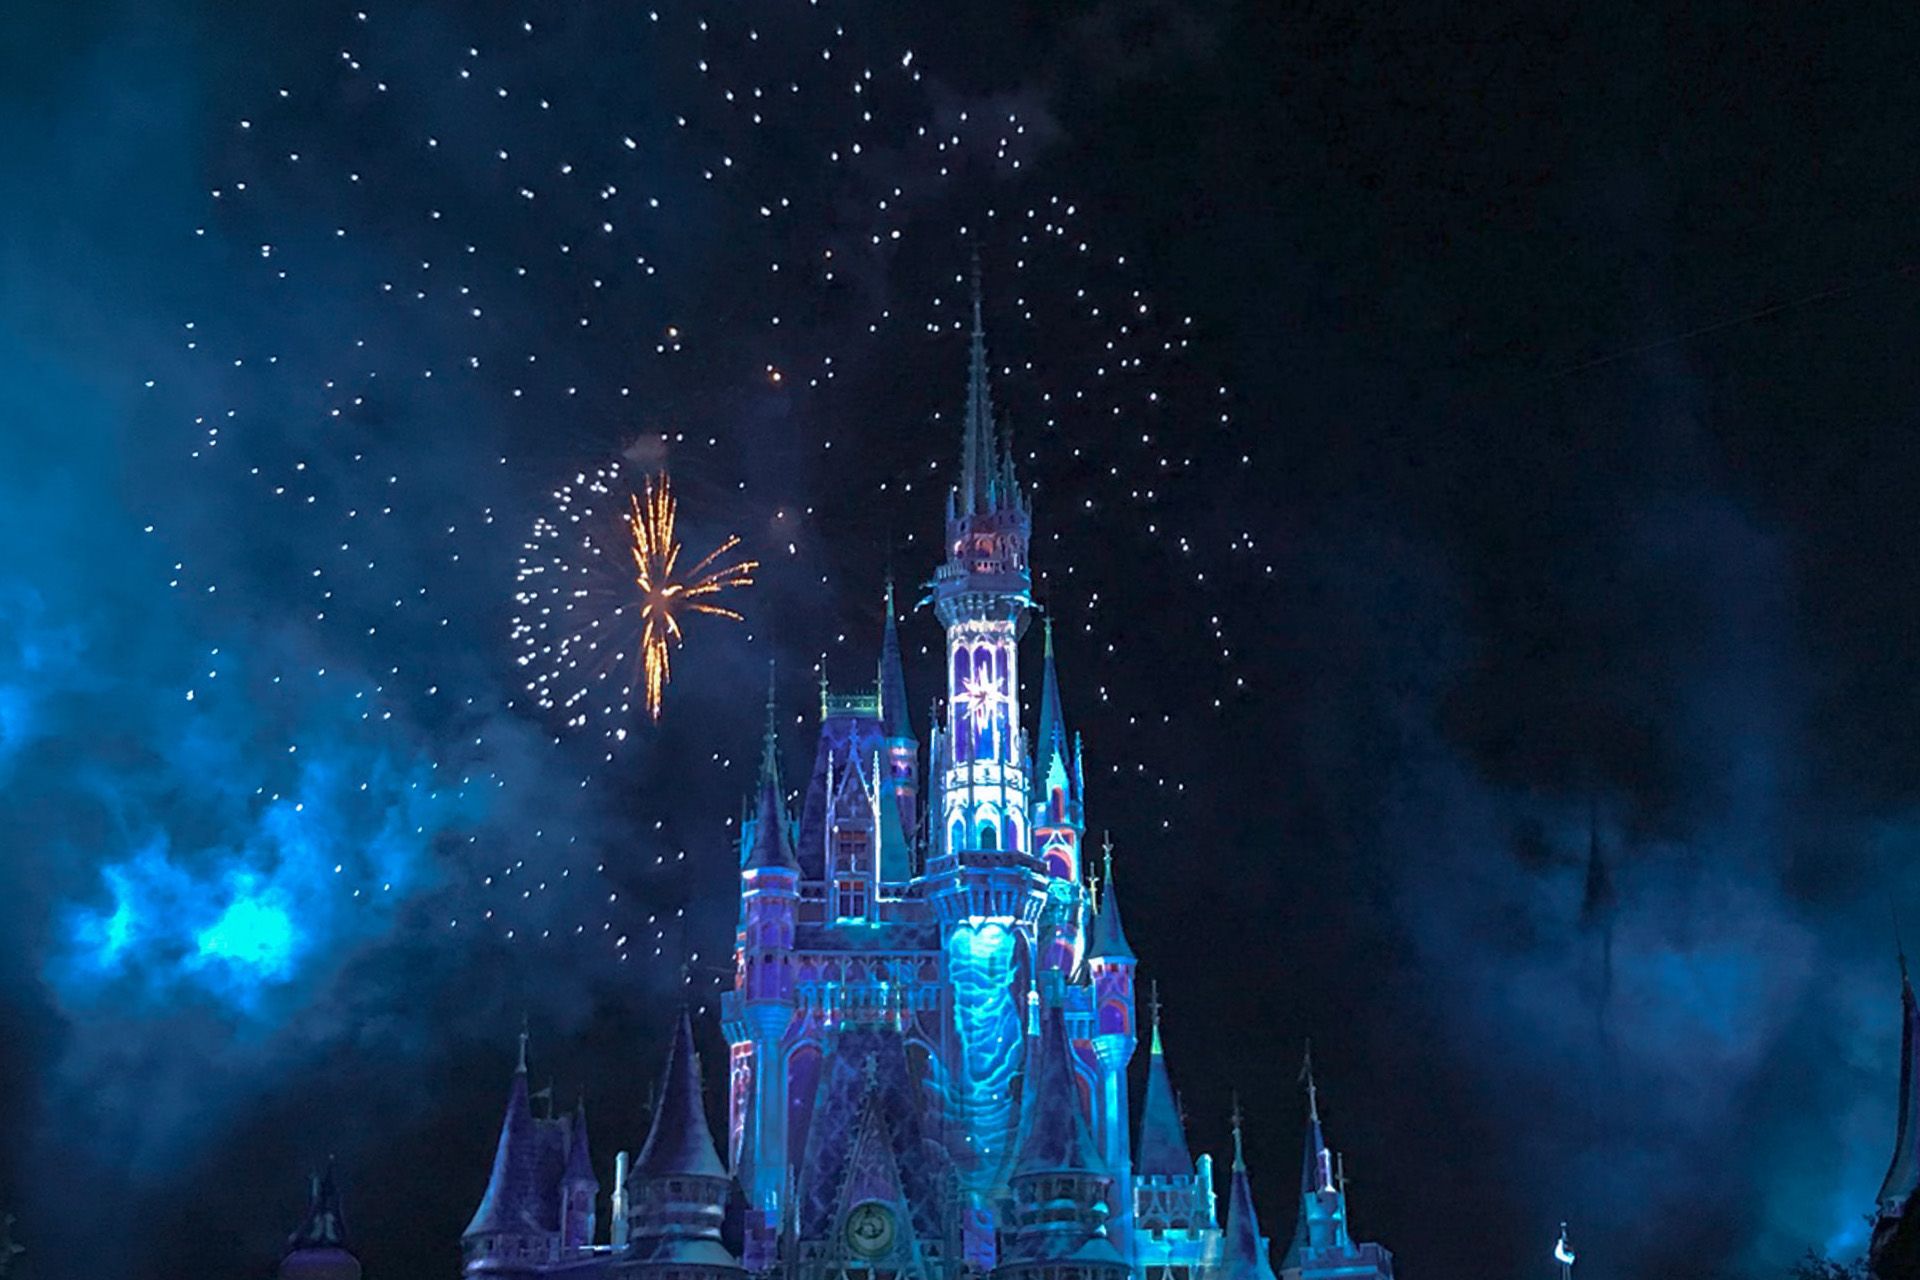 A castle with fireworks in the sky - Disneyland